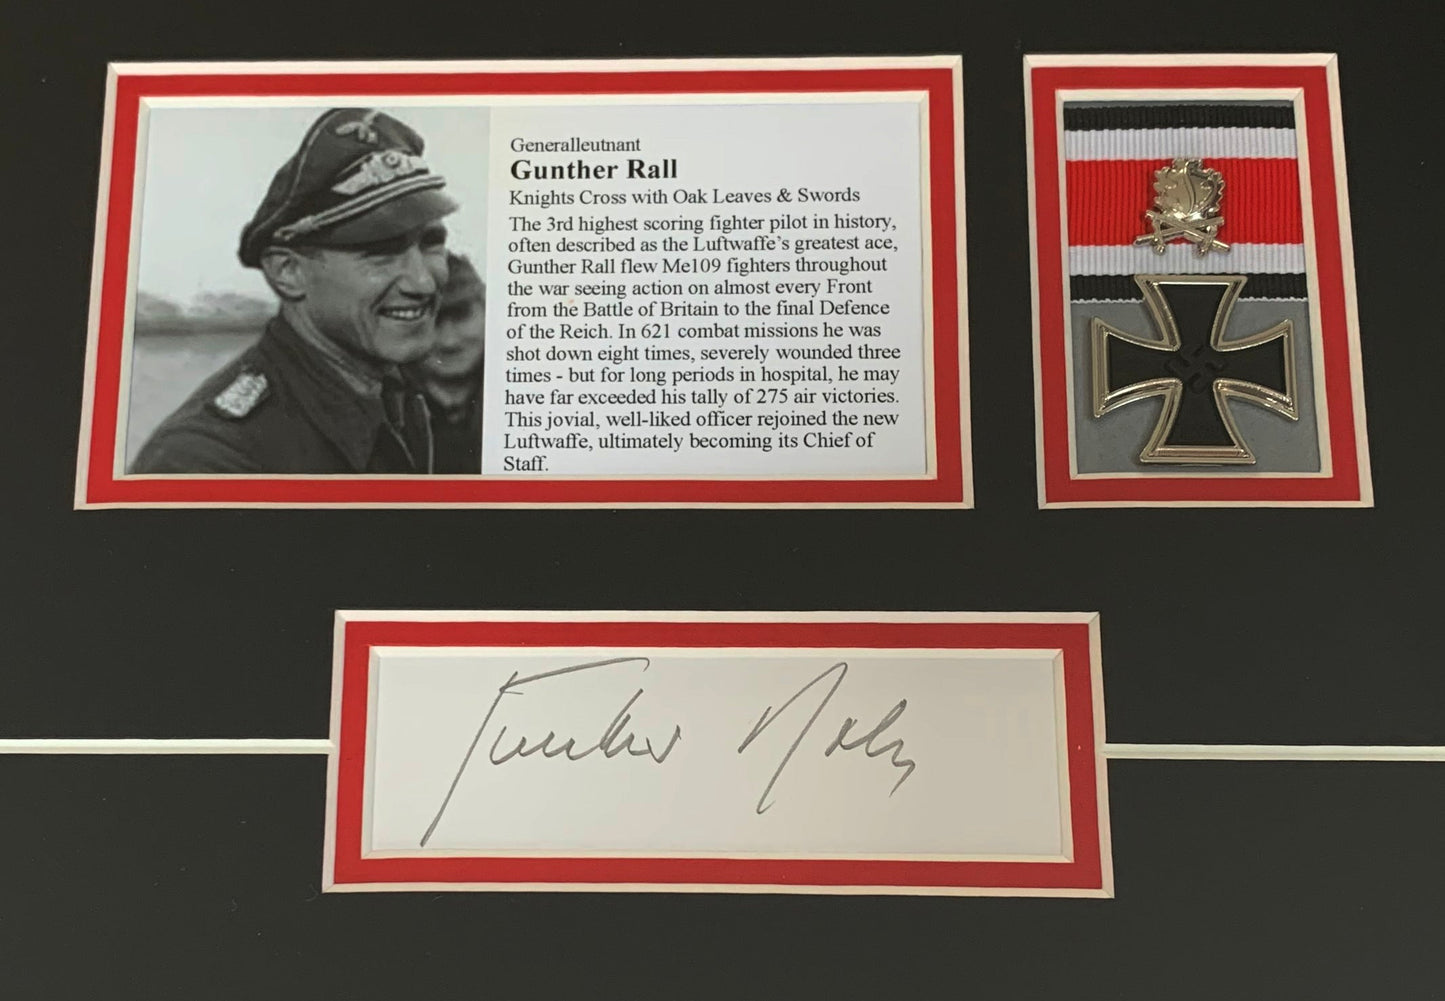 WW2 Luftwaffe Ace Gunther Rall Autographed Original Print Display - Fully Certified